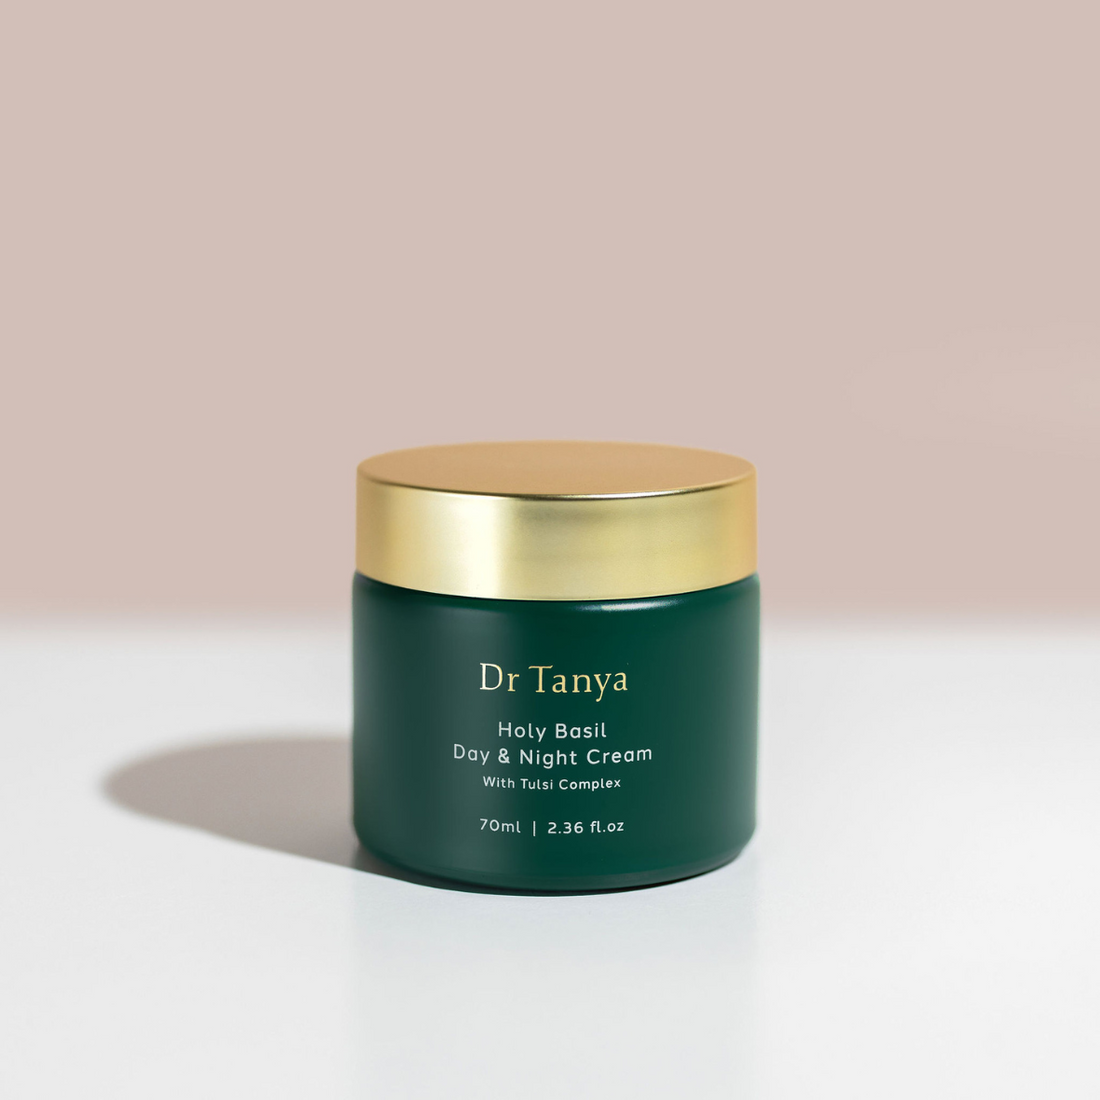 An emerald coloured pot of day and night cream with a gold lid